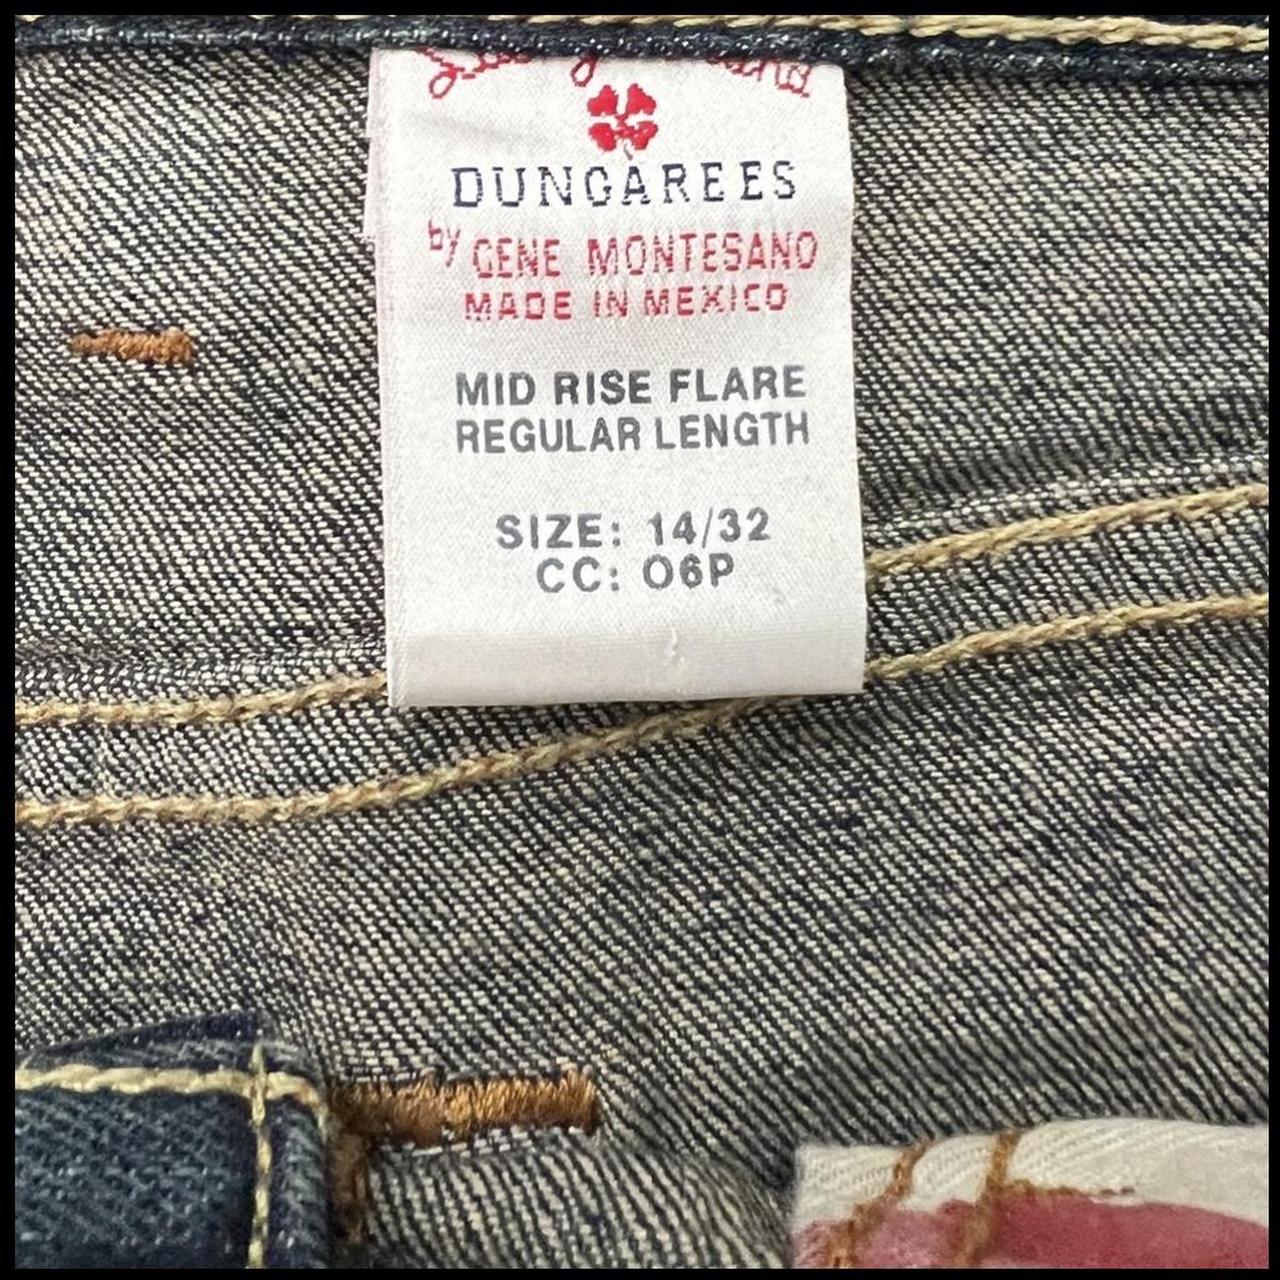 Lucky Brand Dungarees Red Tag Flare Leg Blue Jeans Women 14/32 